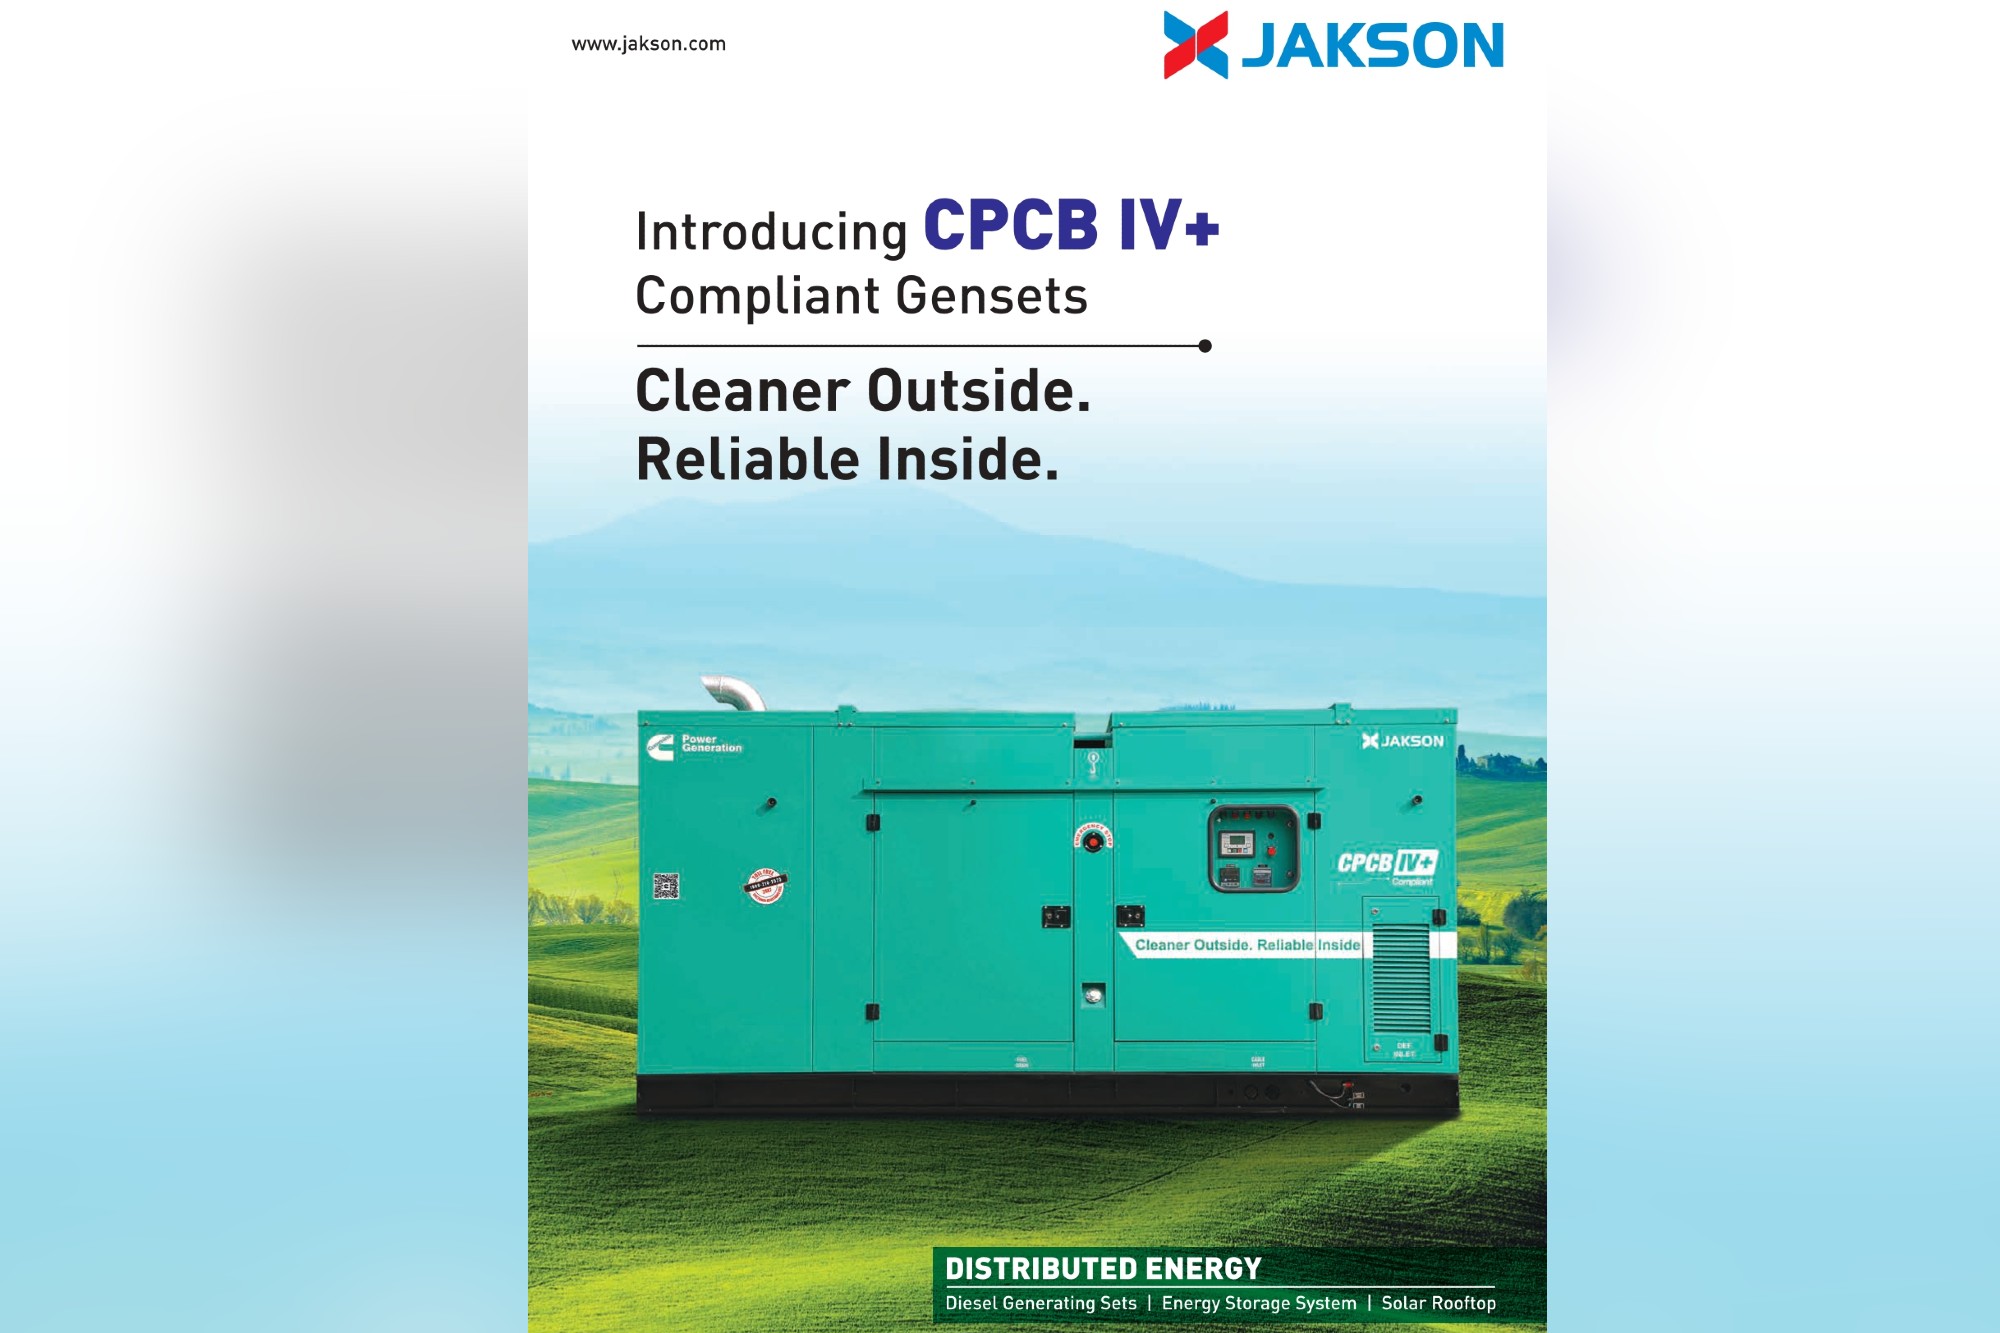 Jakson Group launches innovative CPCB IV+ compliant gensets